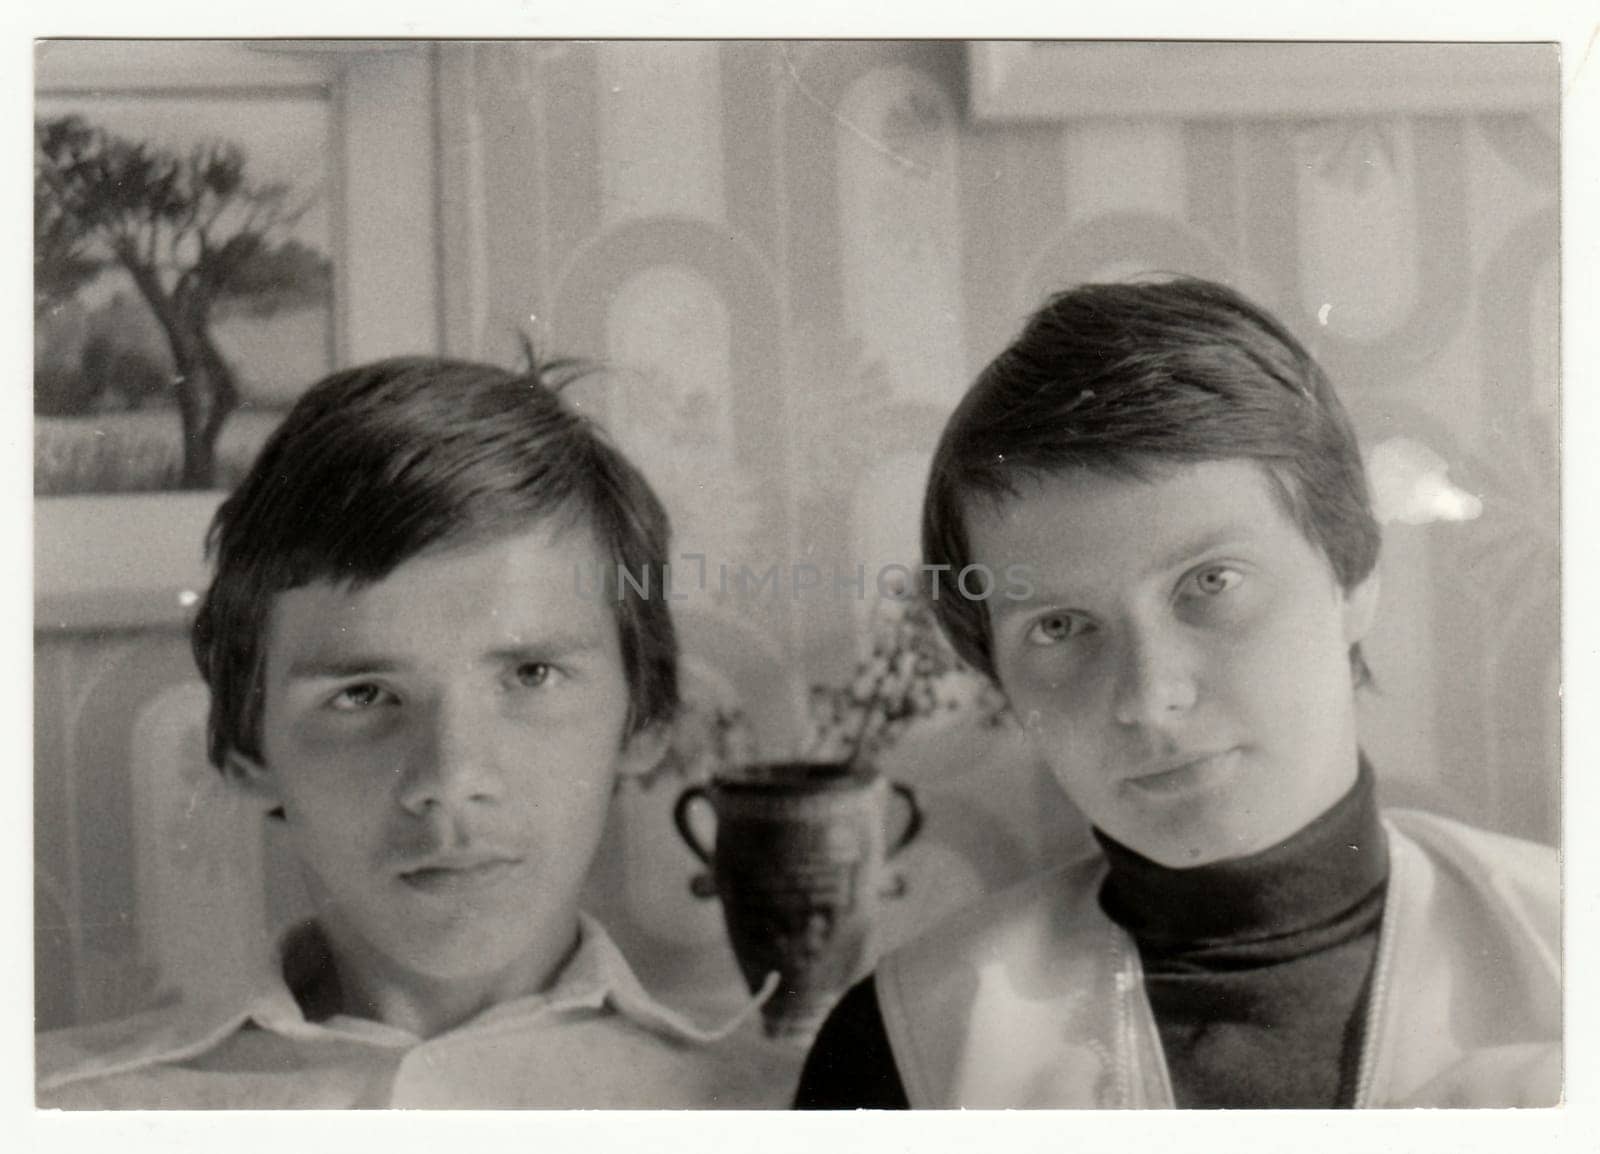 Vintage photo shows a portrait of two adolescent brothers. Retro black and white photography. Circa 1980s. by roman_nerud